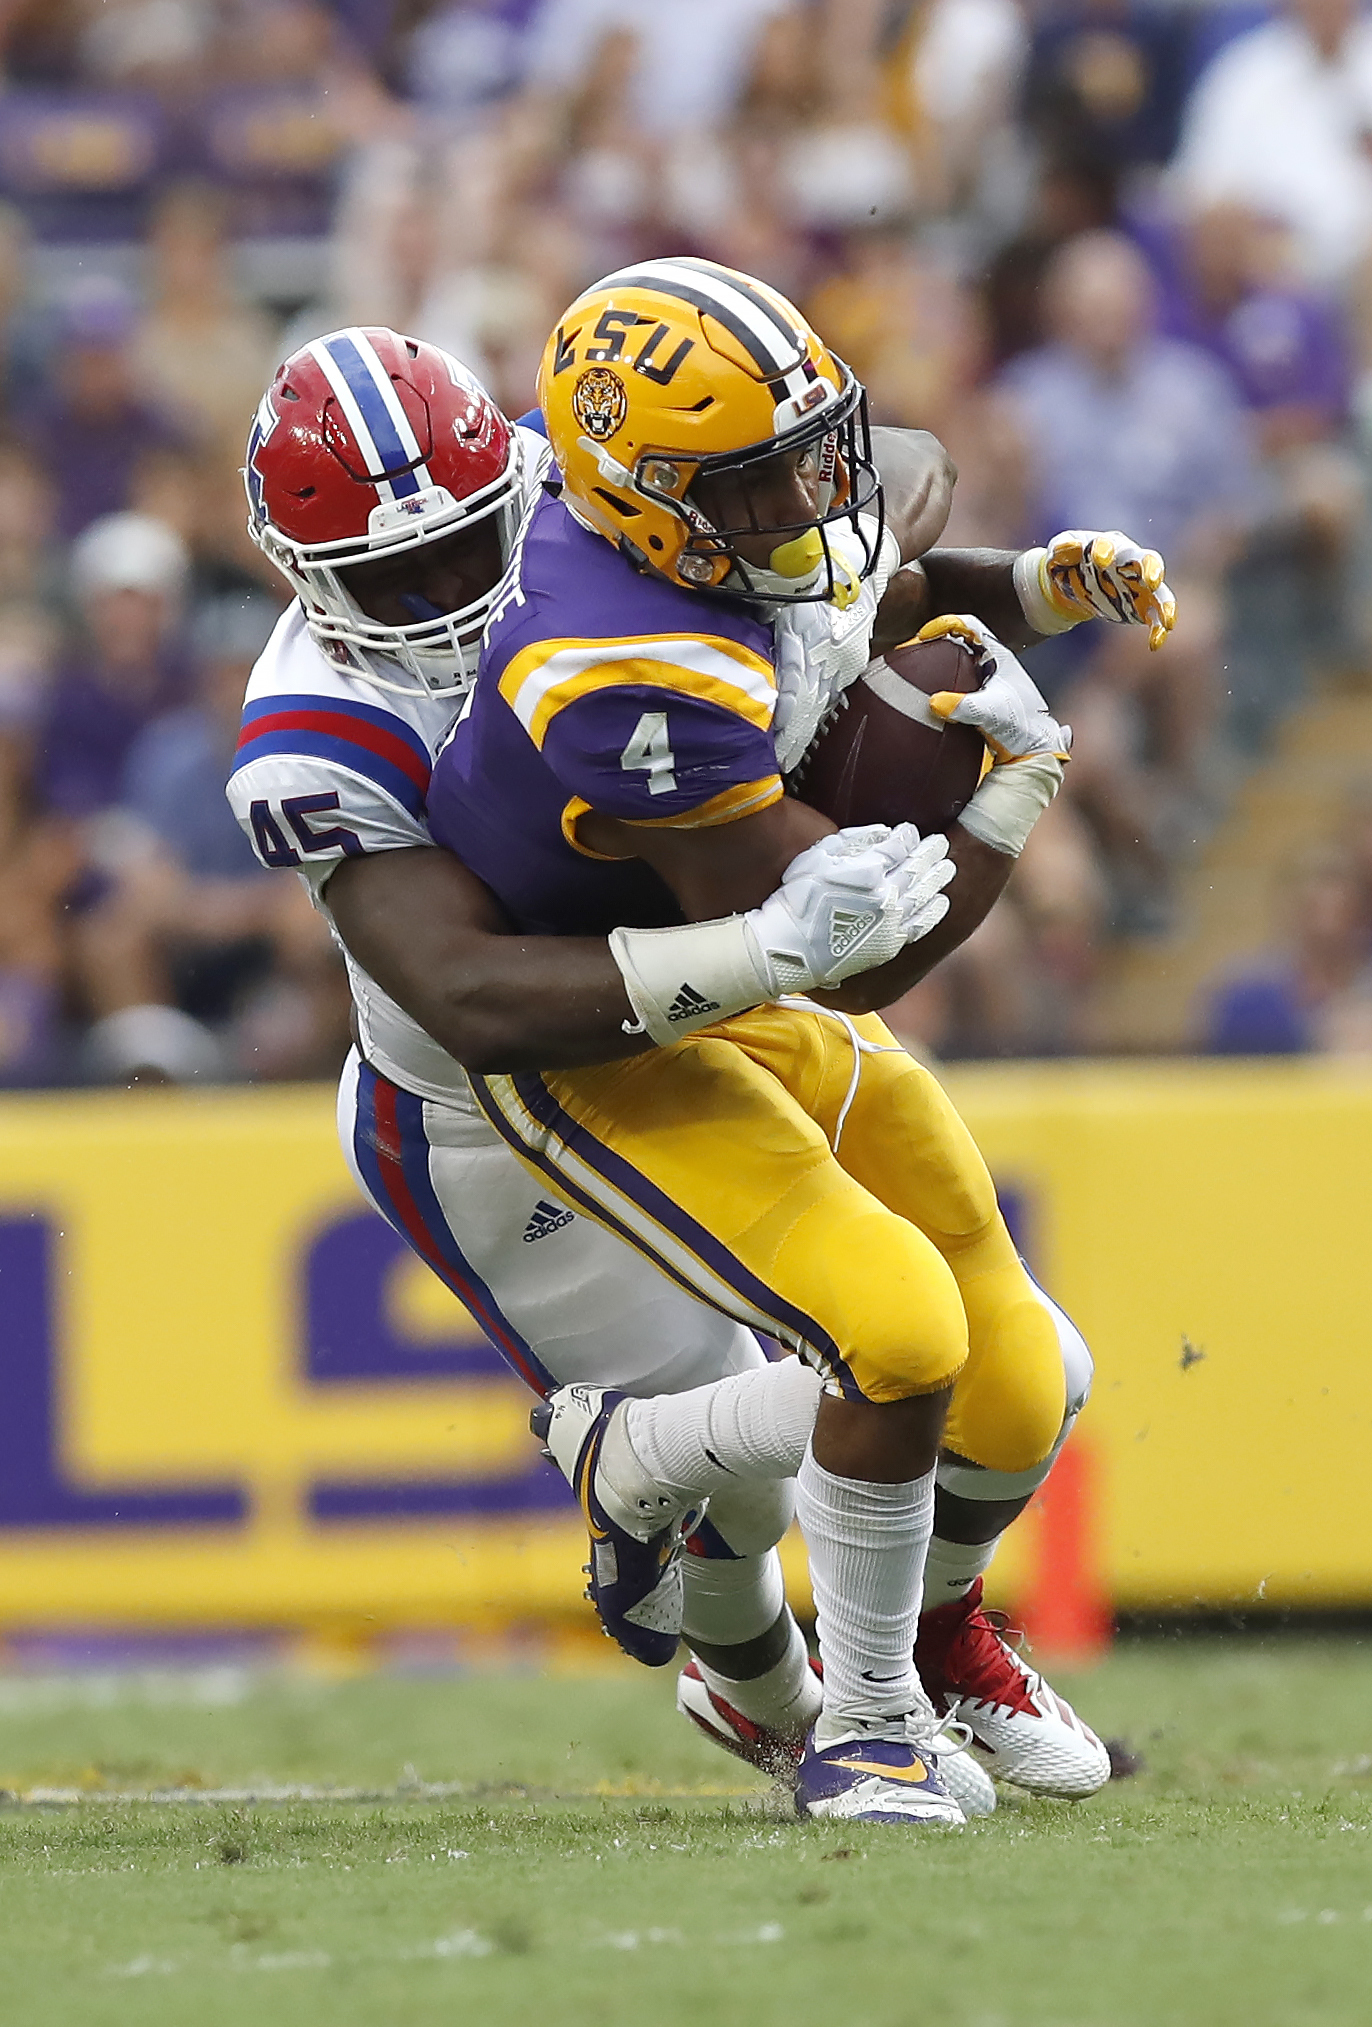 PHOTO: LSU running back Nick Brossette (4) is tackled by Louisiana Tech defensive end Jaylon Ferguson (45) in the first half of an NCAA college football game in Baton Rouge, LA., Saturday, Sept. 22, 2018.